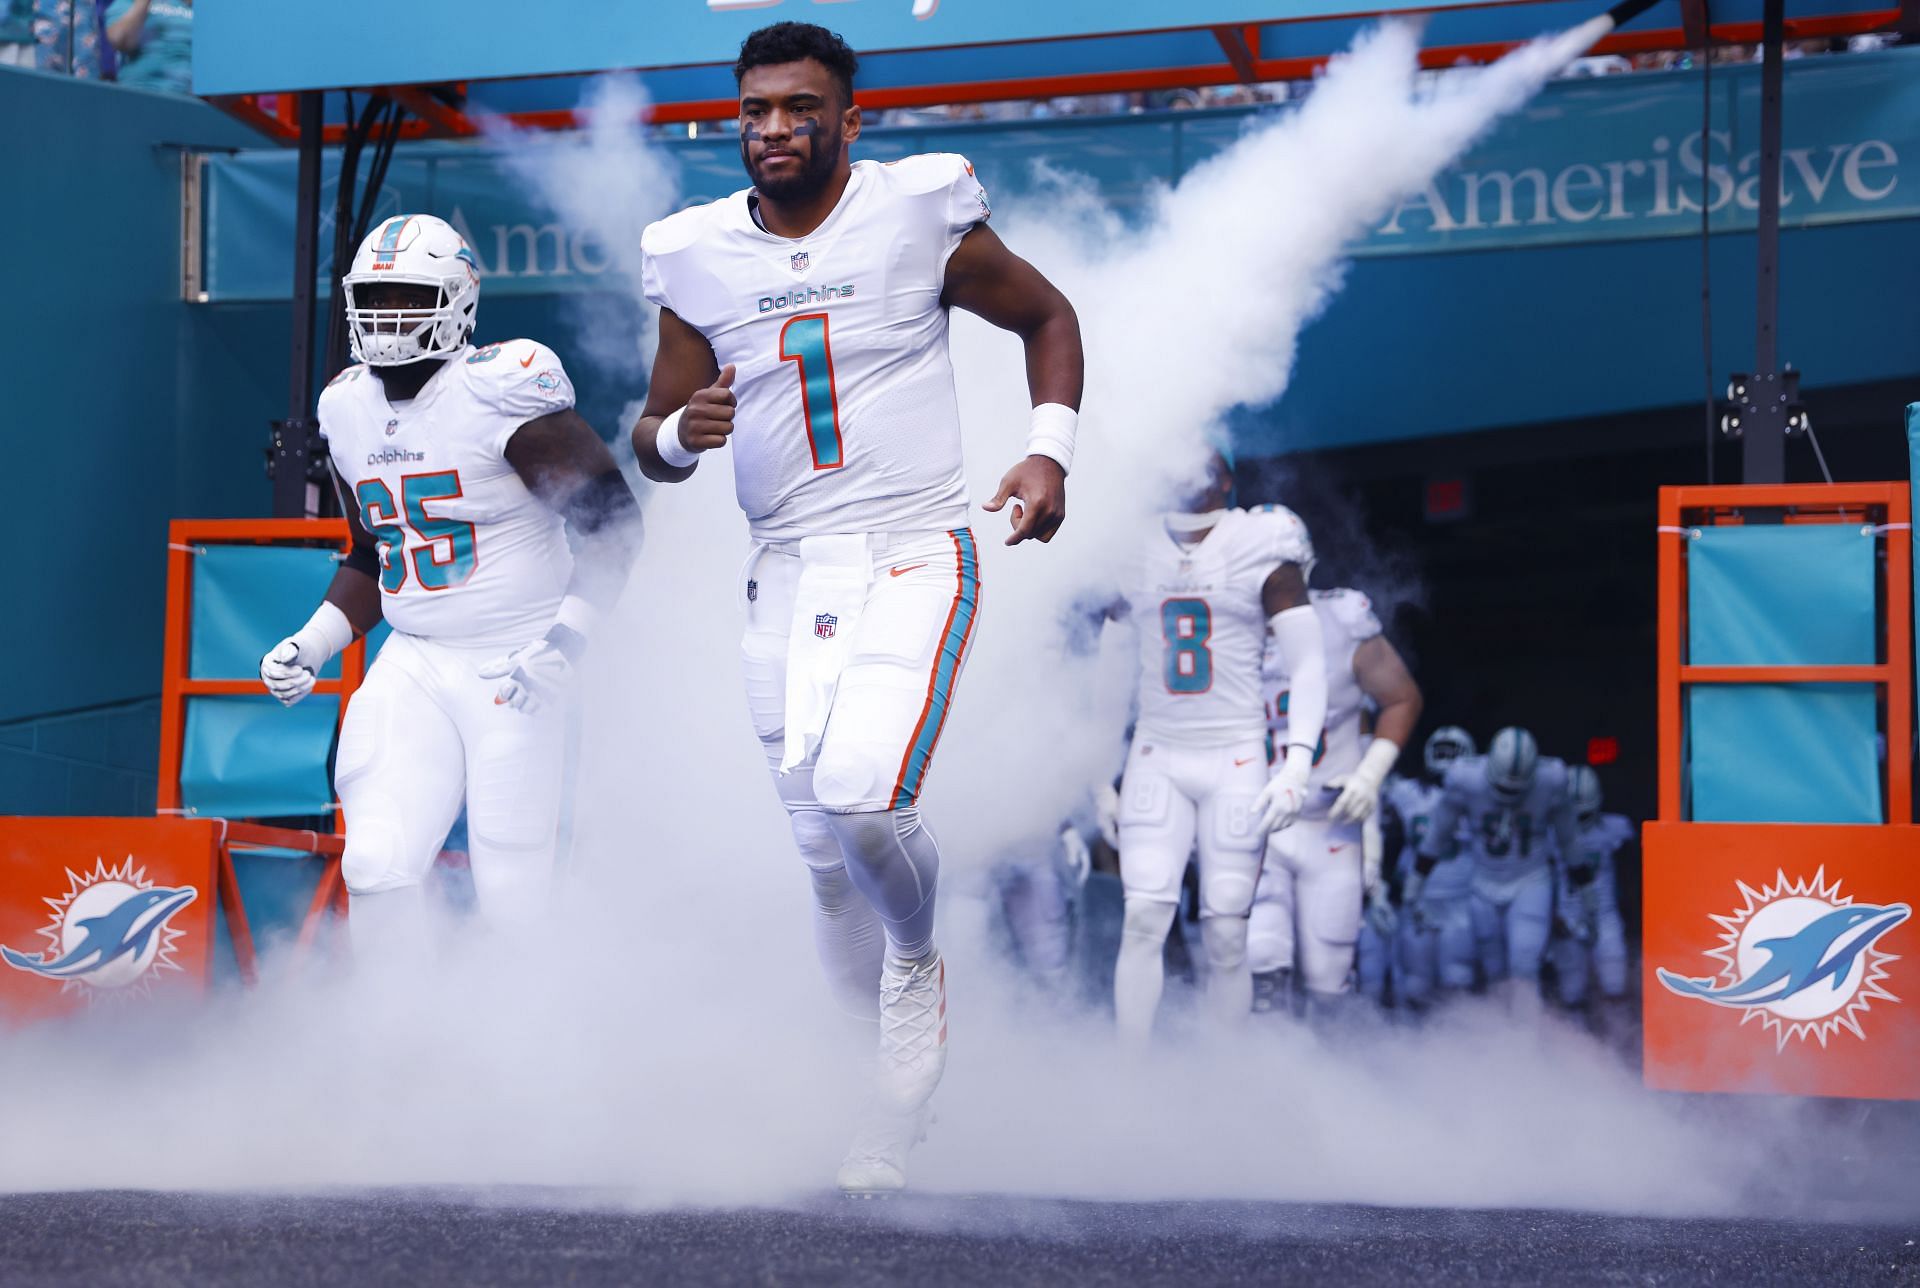 How can the Miami Dolphins make the 2021 NFL playoffs?